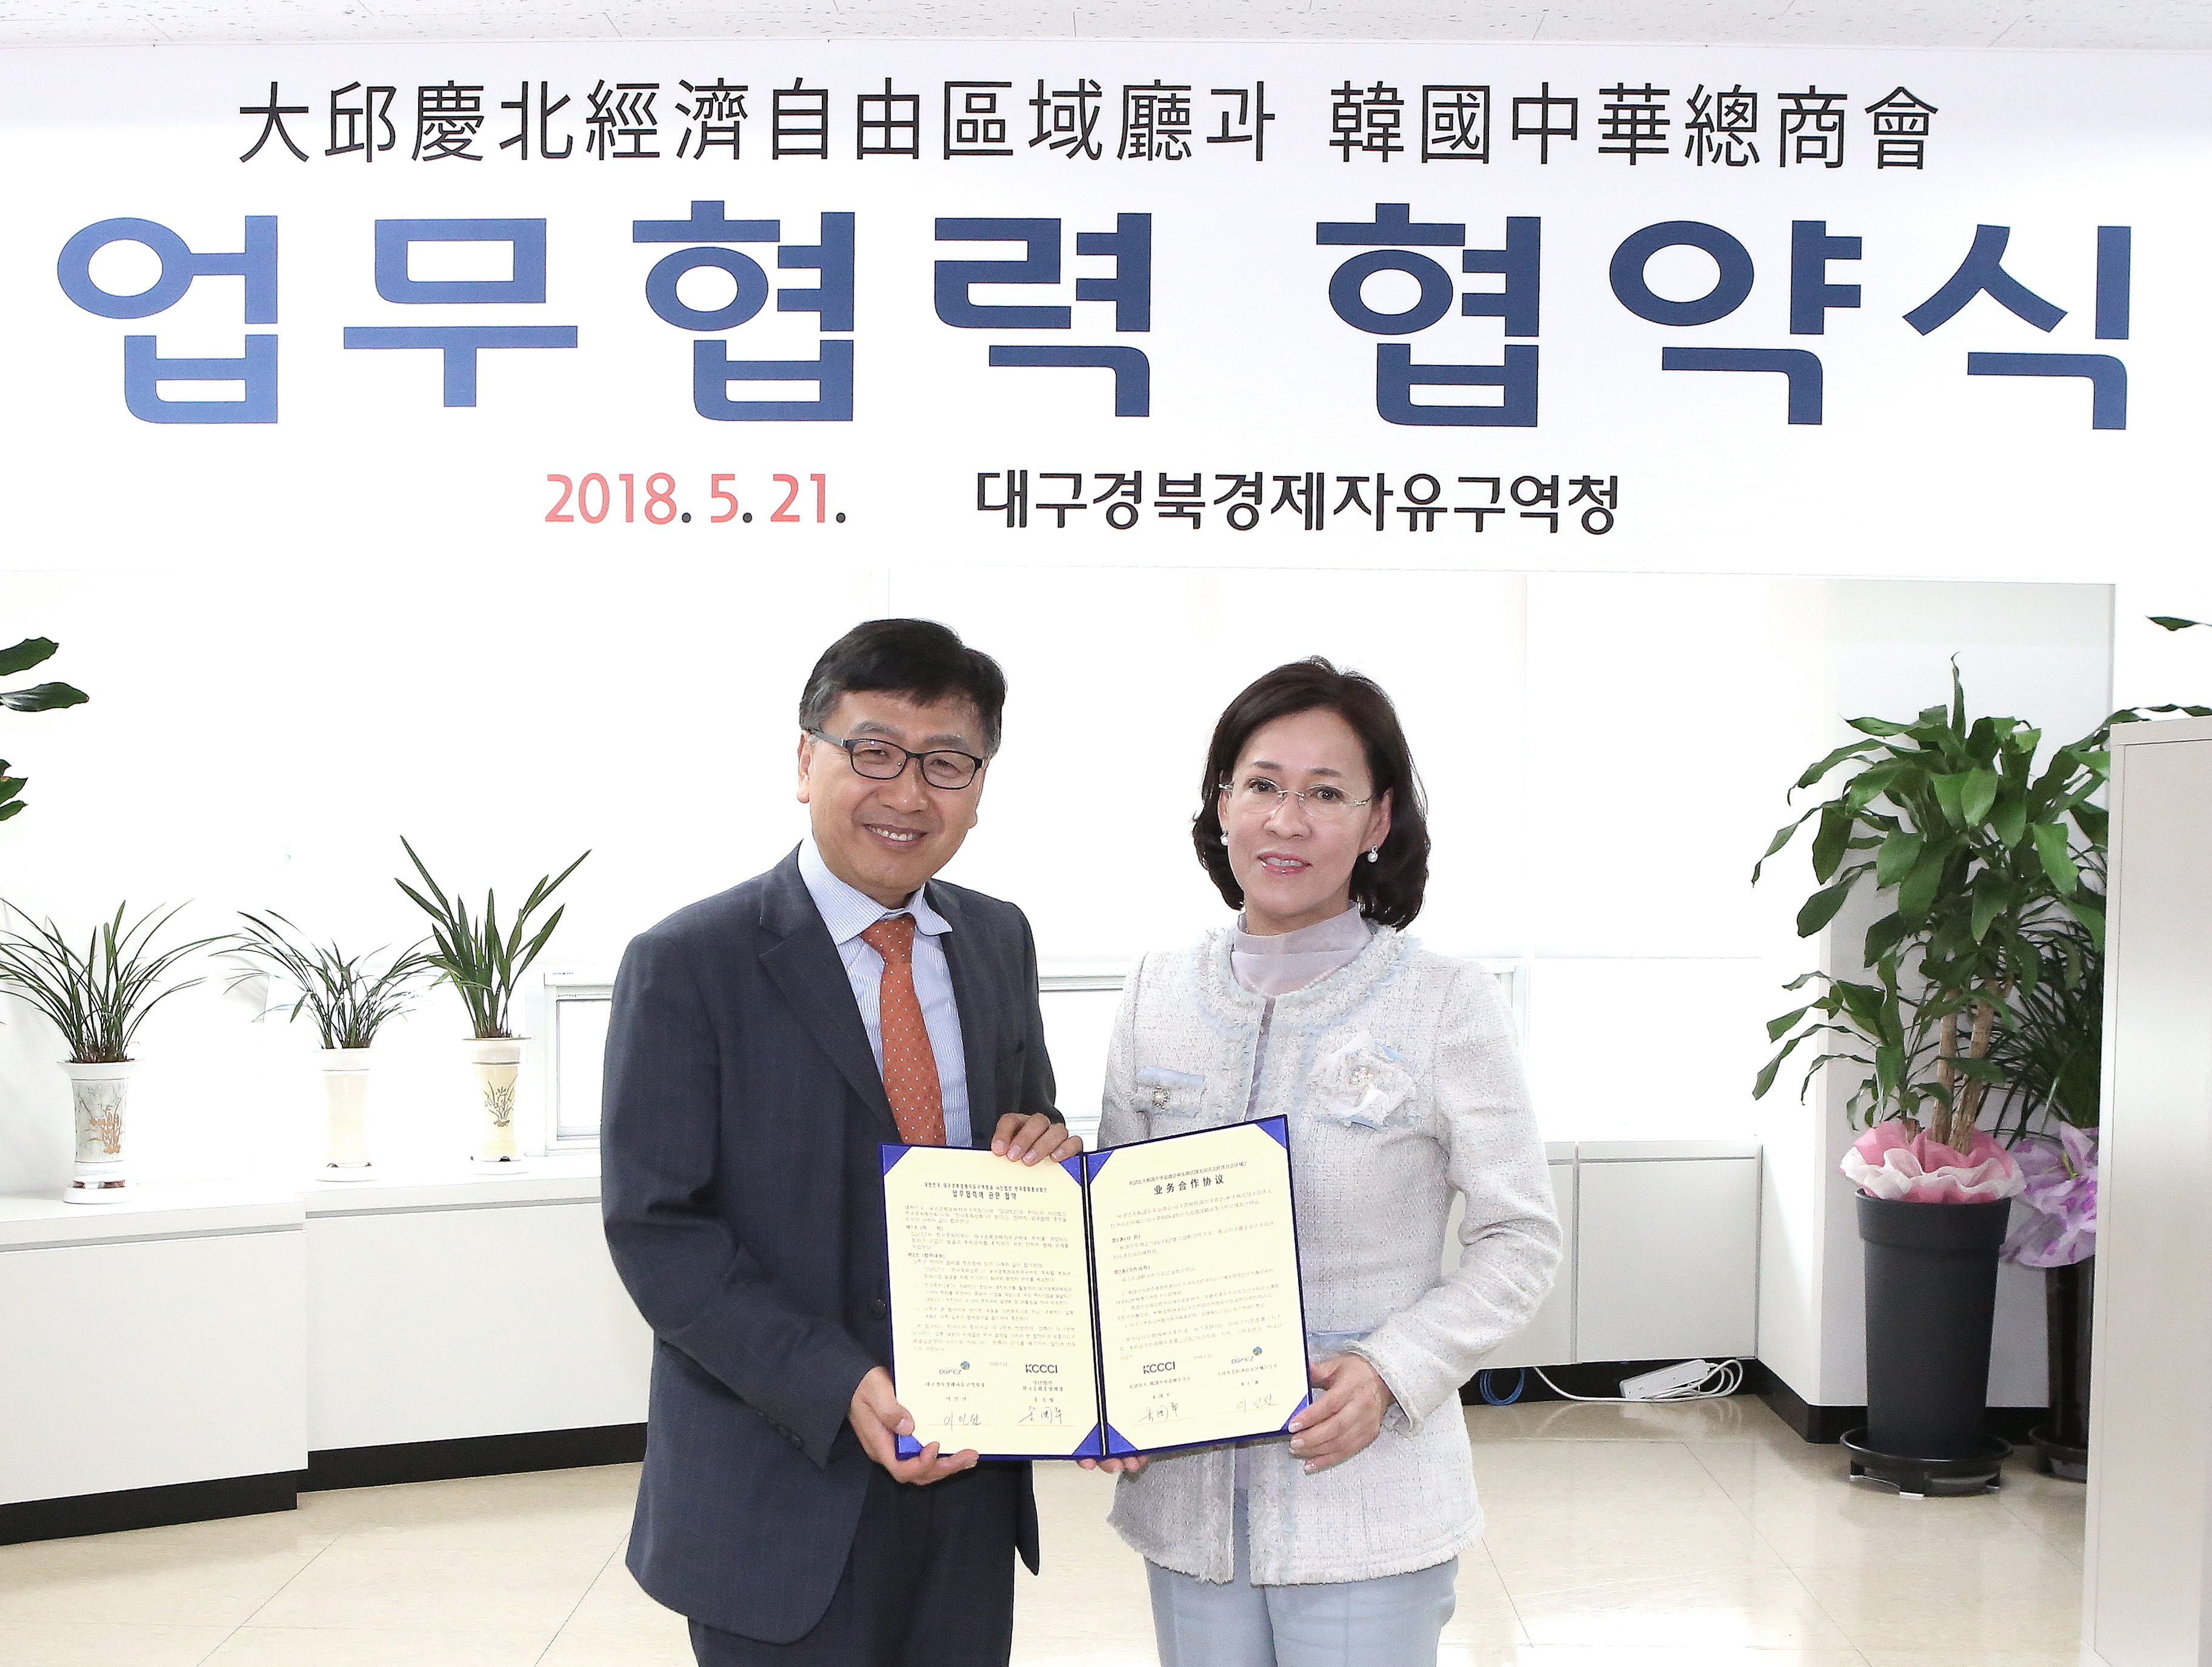 DGFEZ Signs Business Cooperation Agreement with Korea Chines...